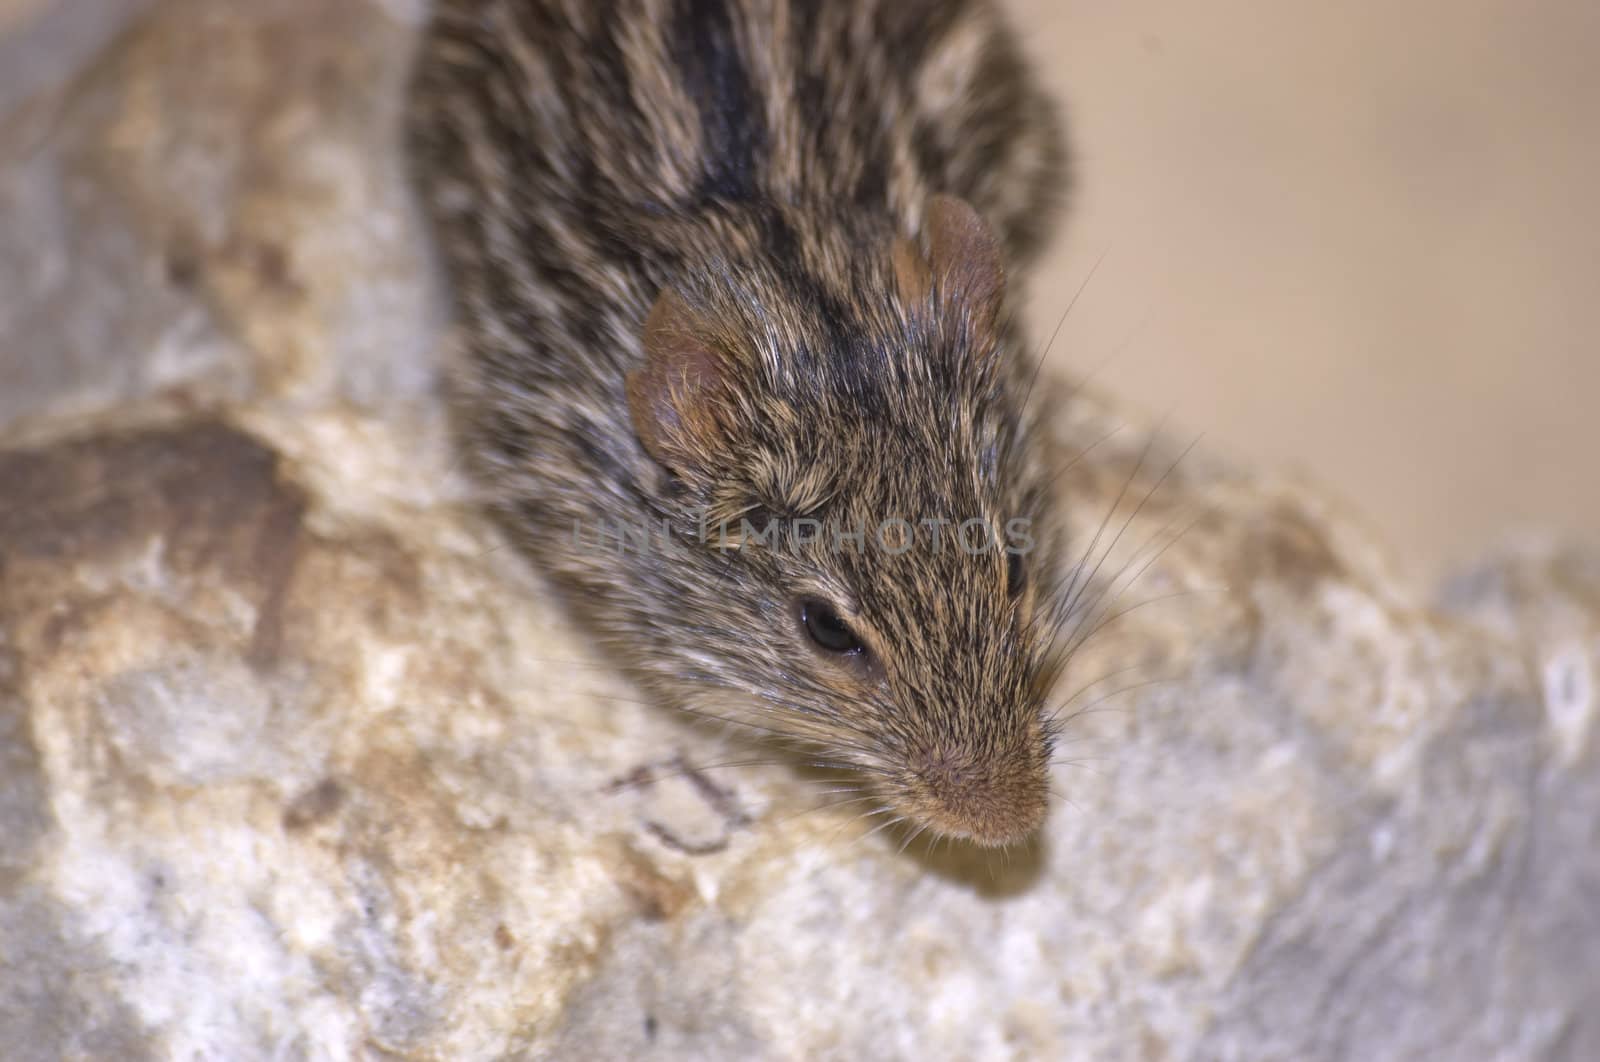 A captive stripped mouse at the zoo